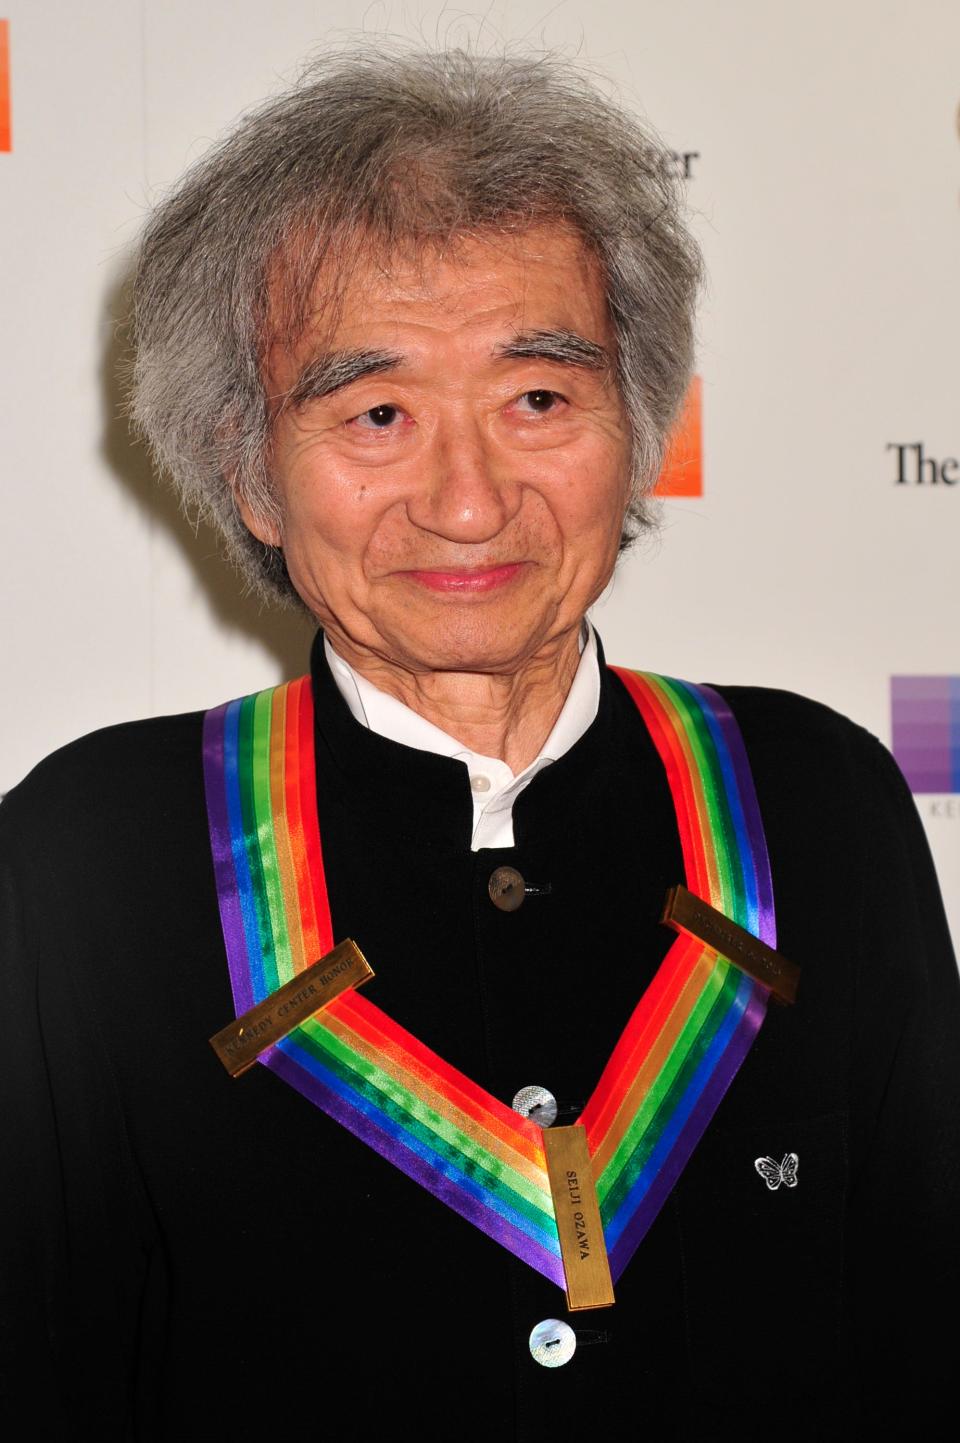 Conductor Seiji Ozawa dies aged 88. Ozawa, an honoree at the 38th Annual Kennedy Center Honors Gala, arrives to the event here at the Kennedy Center for the Performing Arts on Dec. 6, 2015, in Washington, DC.